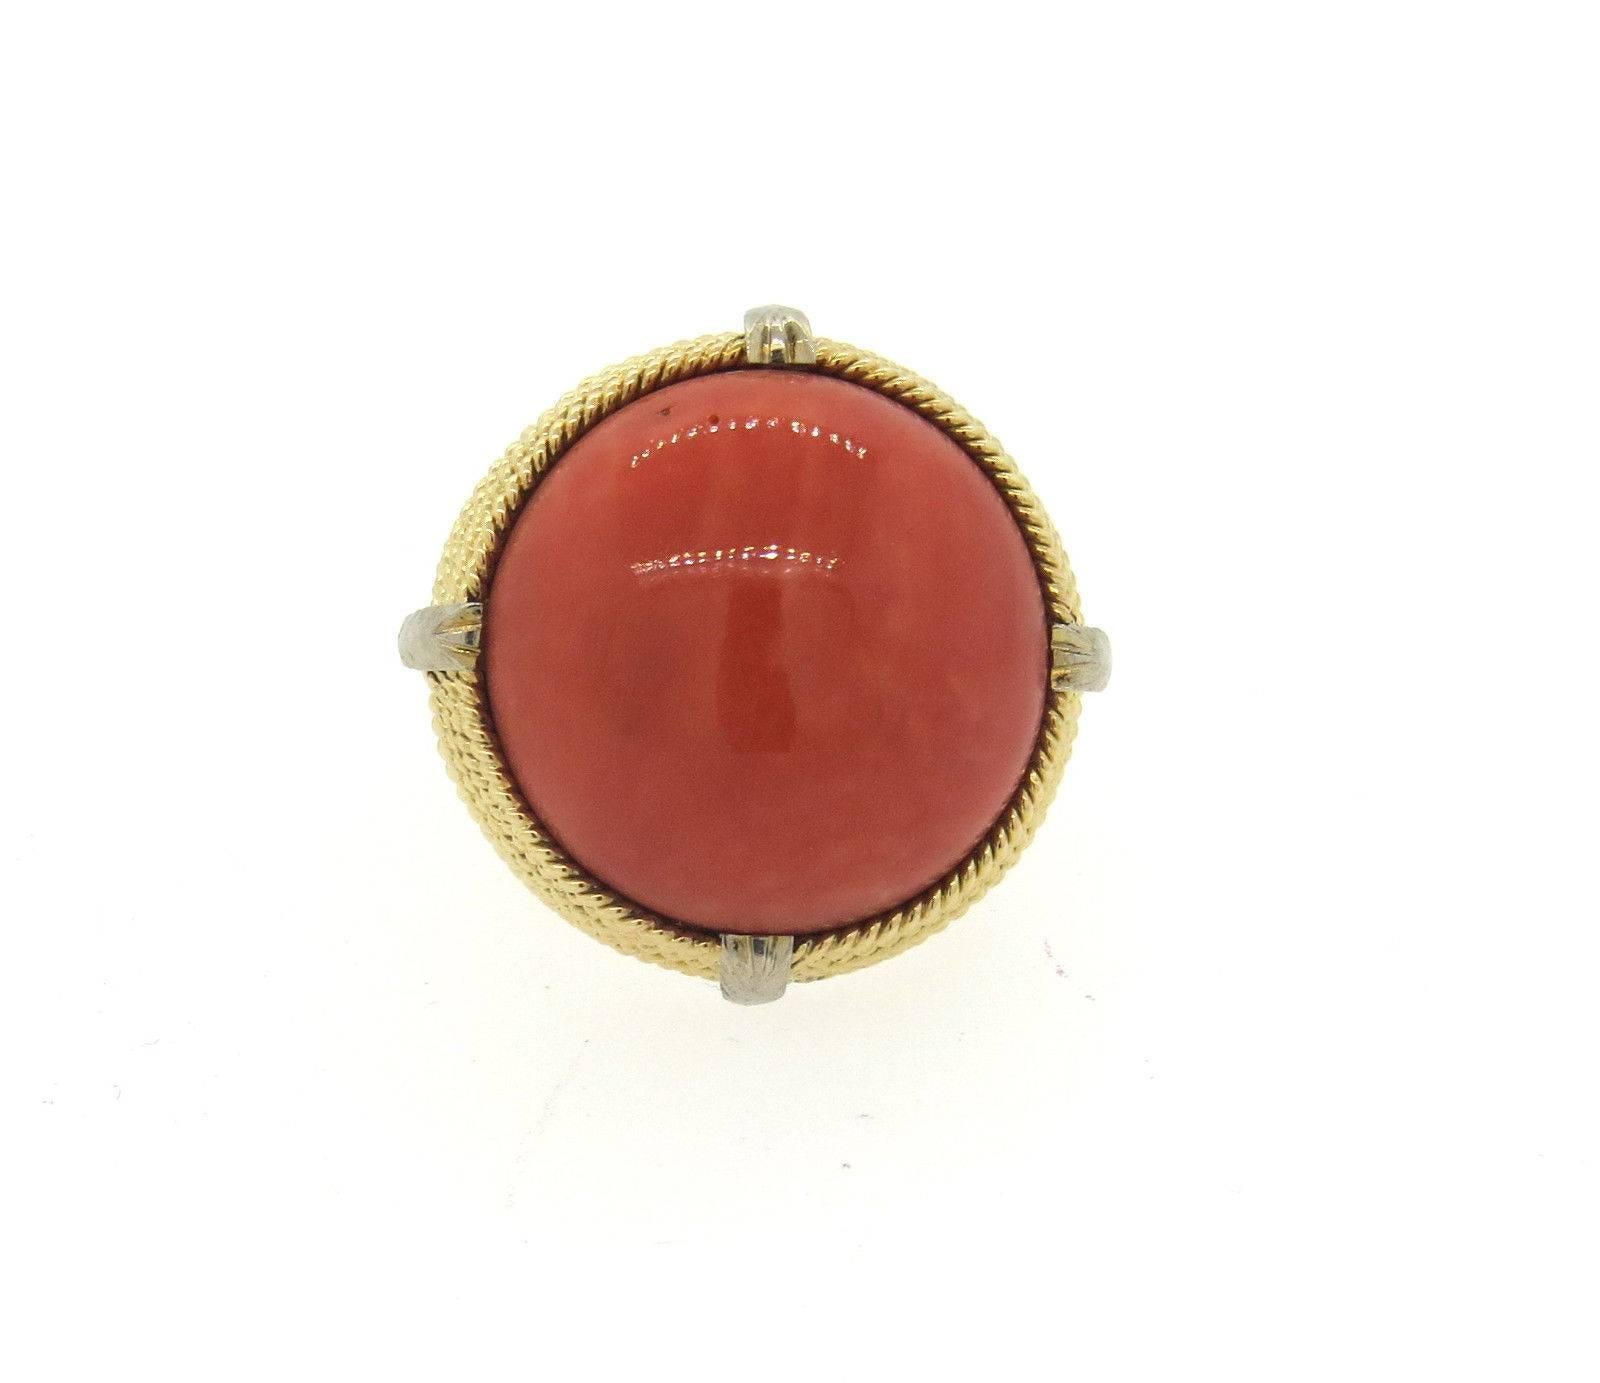 A 14k yellow gold ring set with a 20mm coral cabochon.  The ring is a size 5 and the top of the ring is 25mm in diameter.  The weight of the reing is 17.5 grams.  Marked 14k.